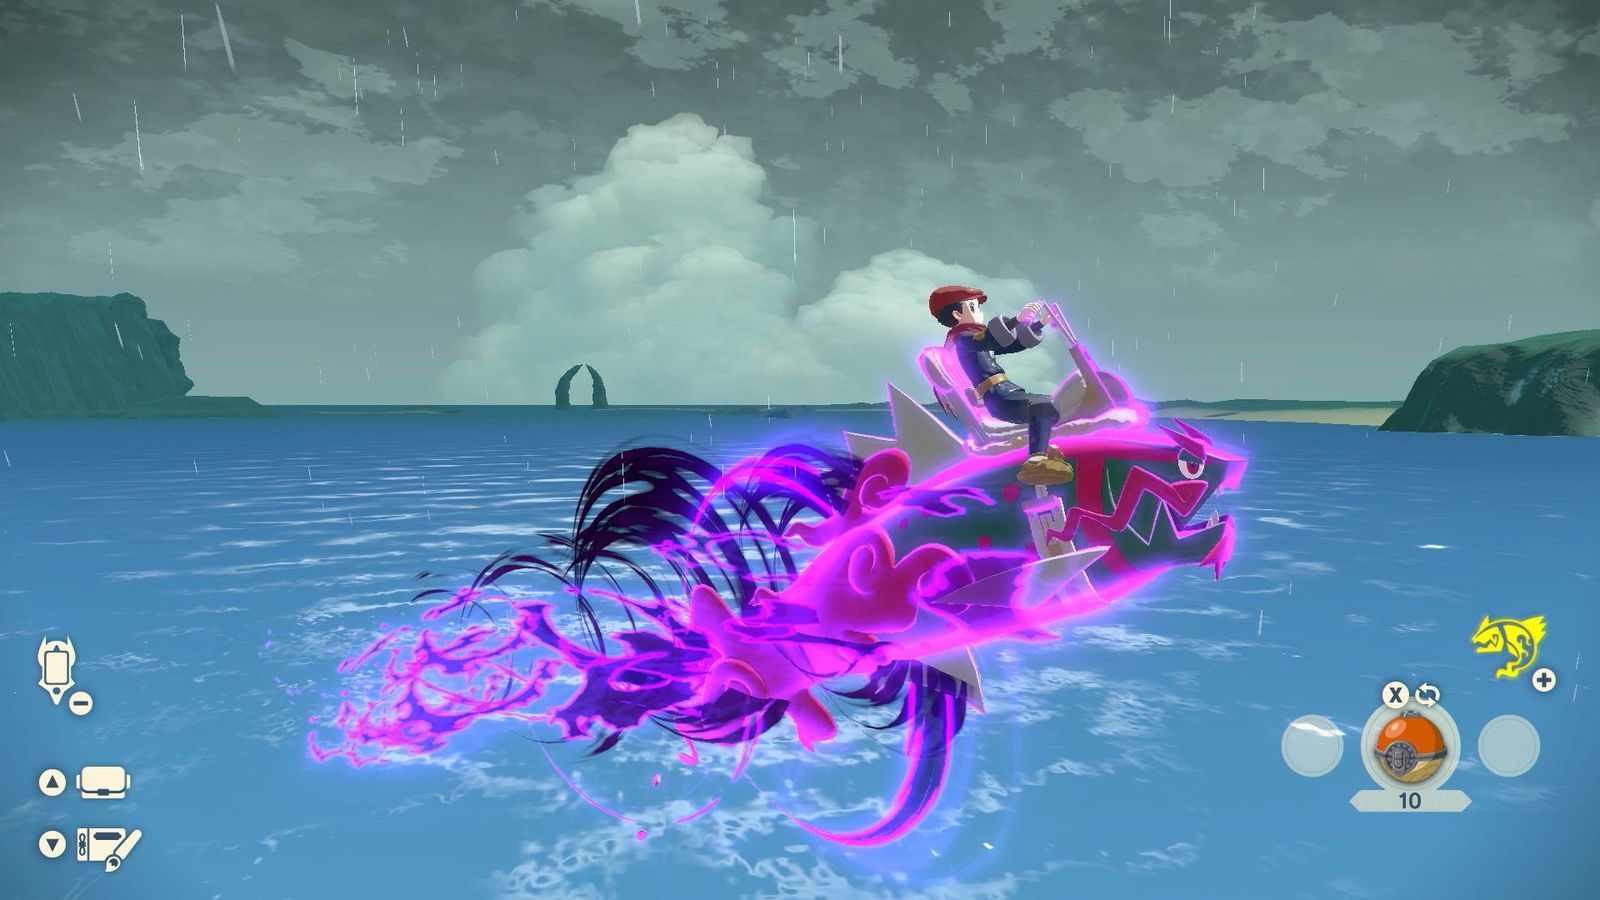 A Pokémon trainer rides a Basculegion that is glowing with purple flames.